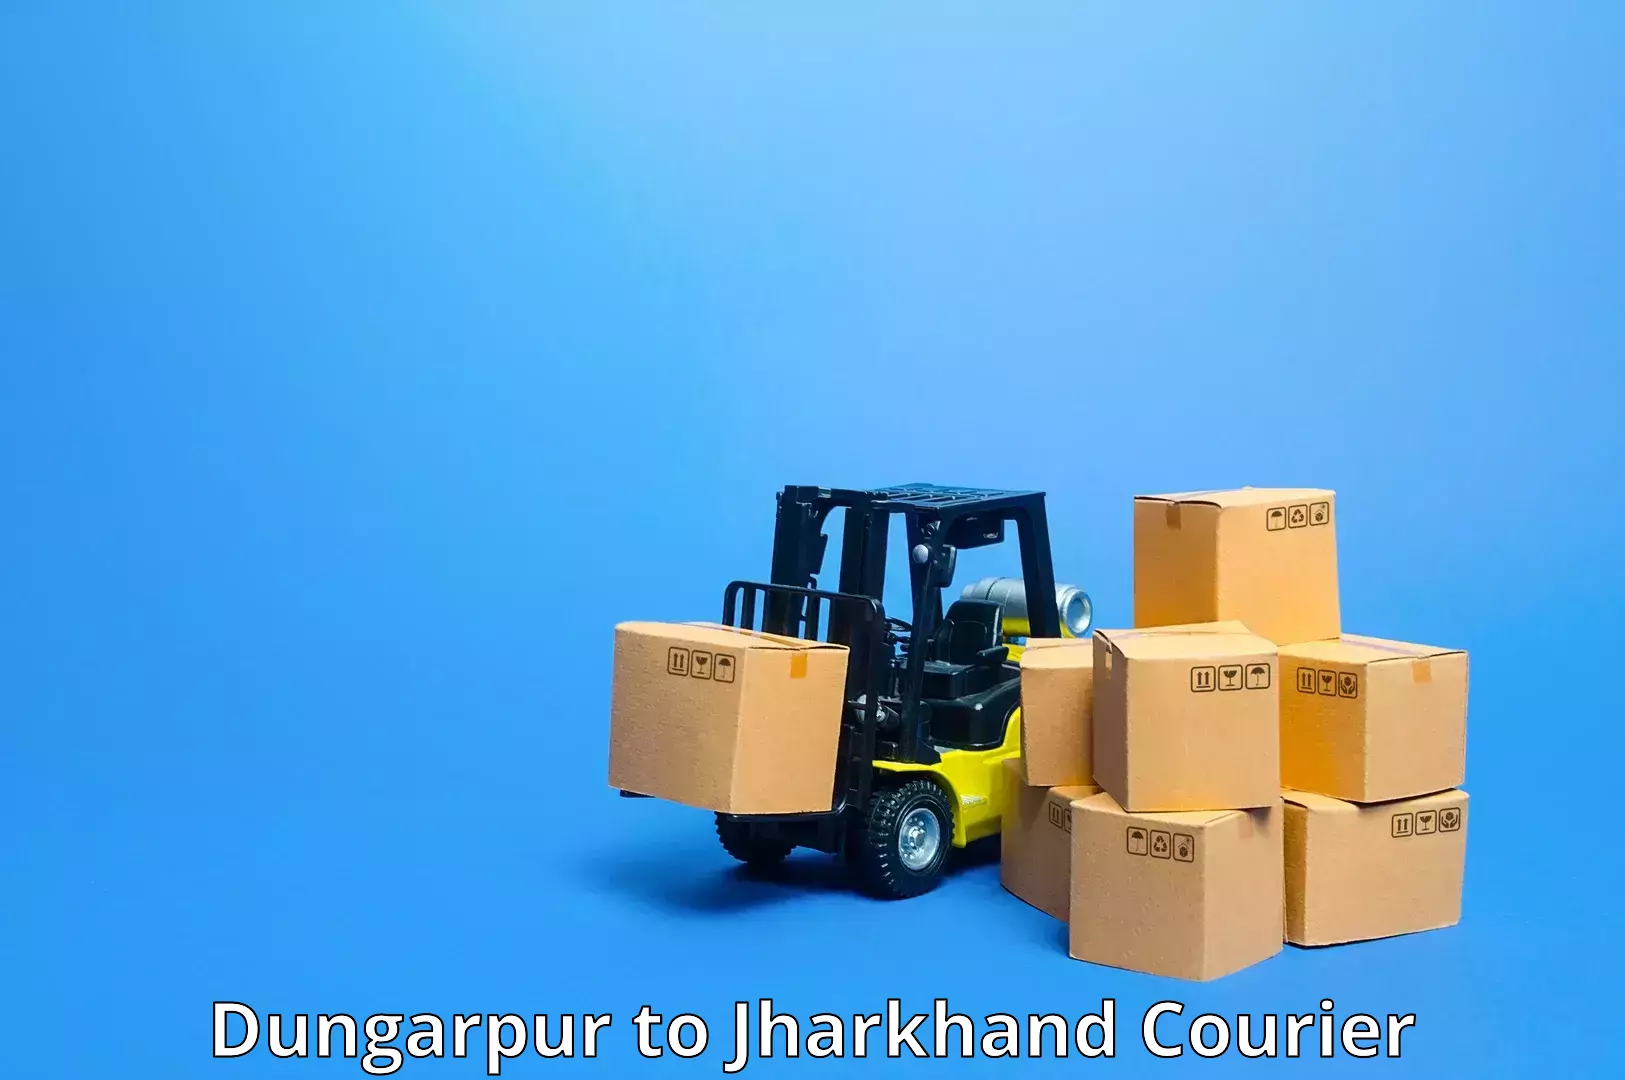 State-of-the-art courier technology Dungarpur to Manoharpur